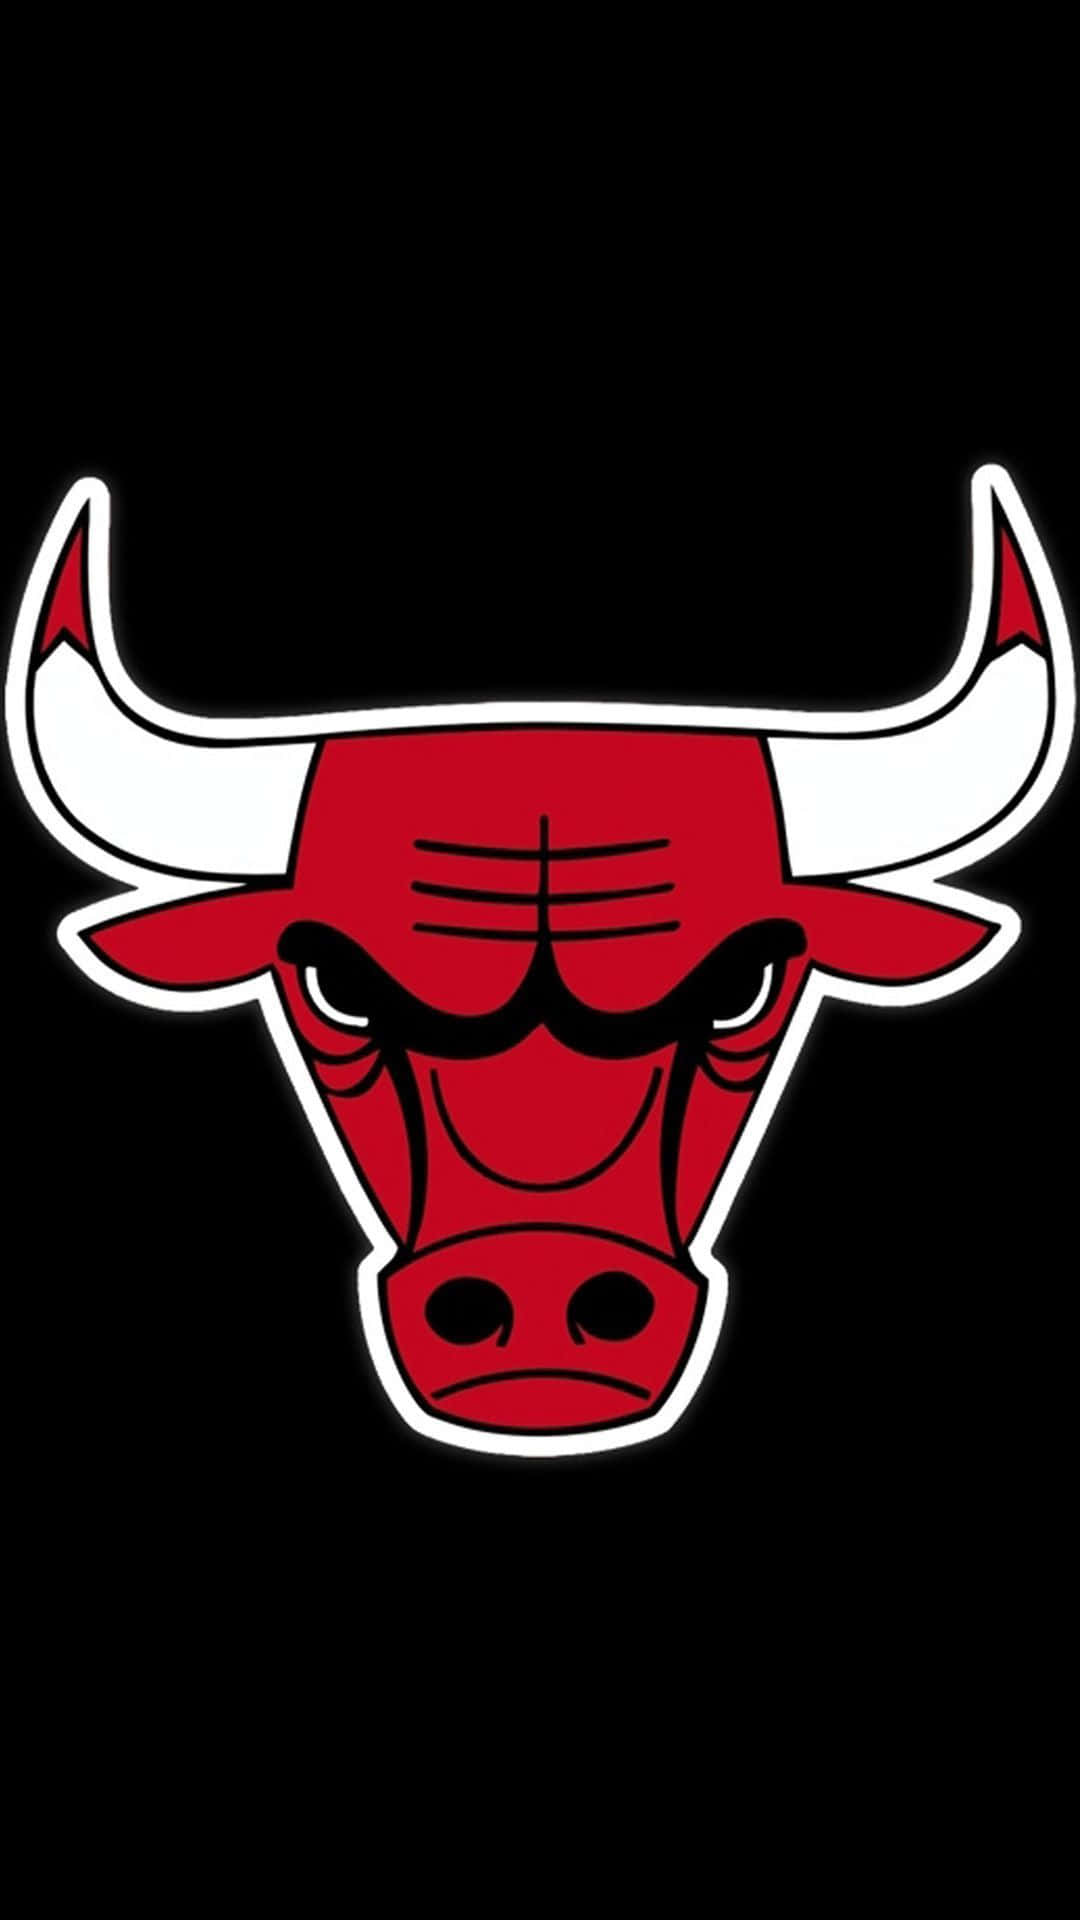 Show Your Chicago Bulls Pride With This Exclusive Iphone Design! Background